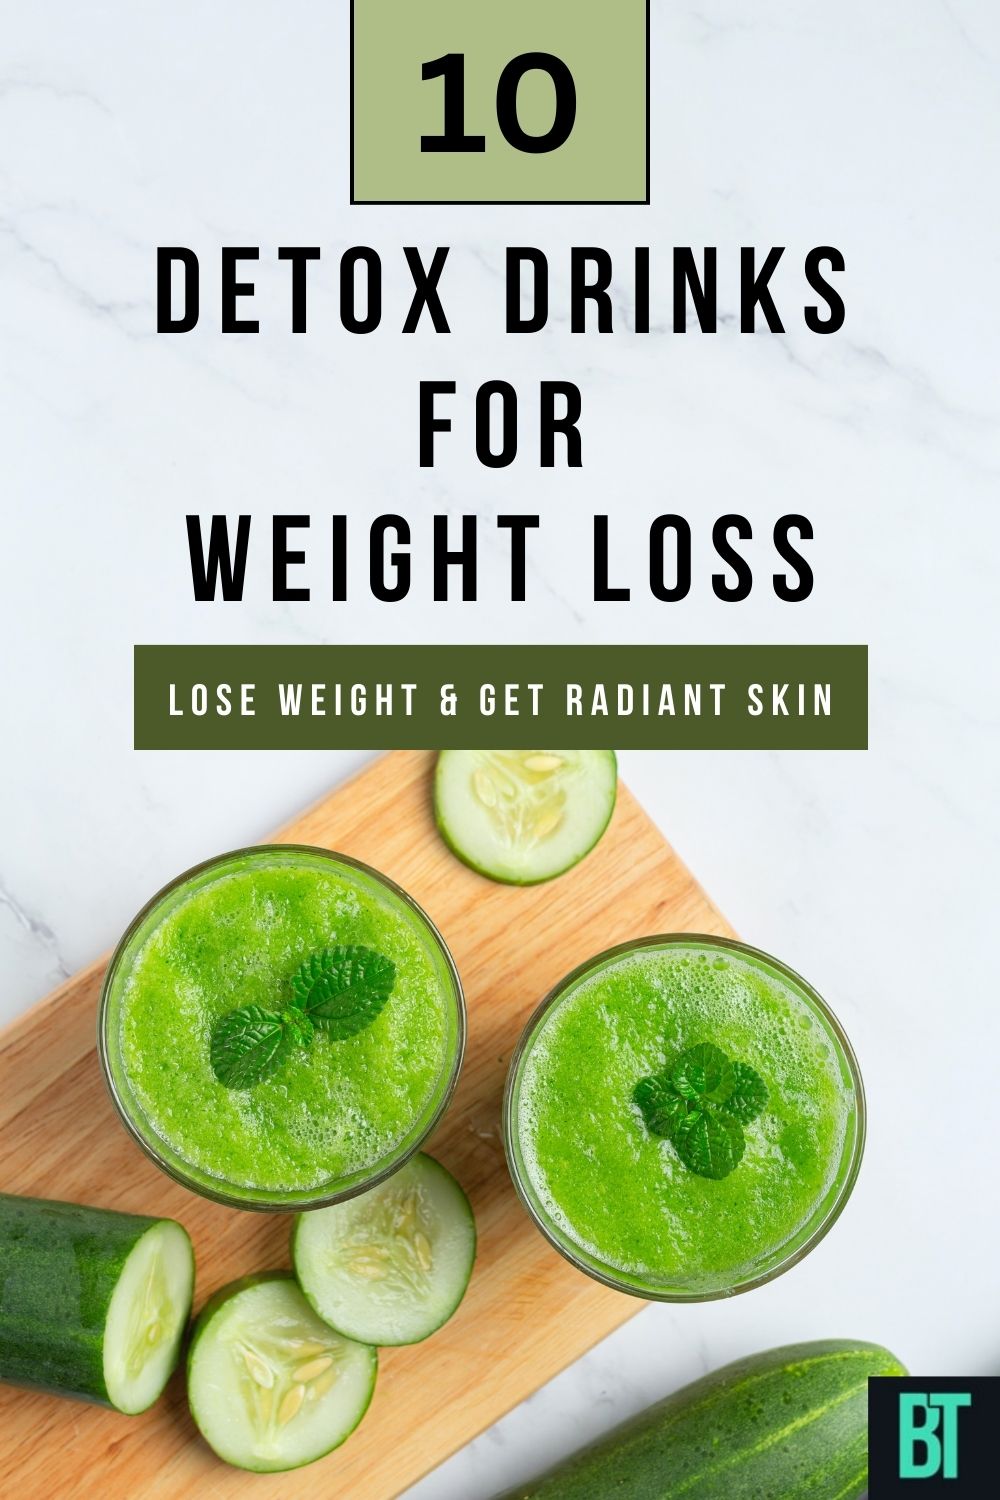 Sip Your Way Slim: 10 Detox Drinks for Weight Loss and Radiant Skin